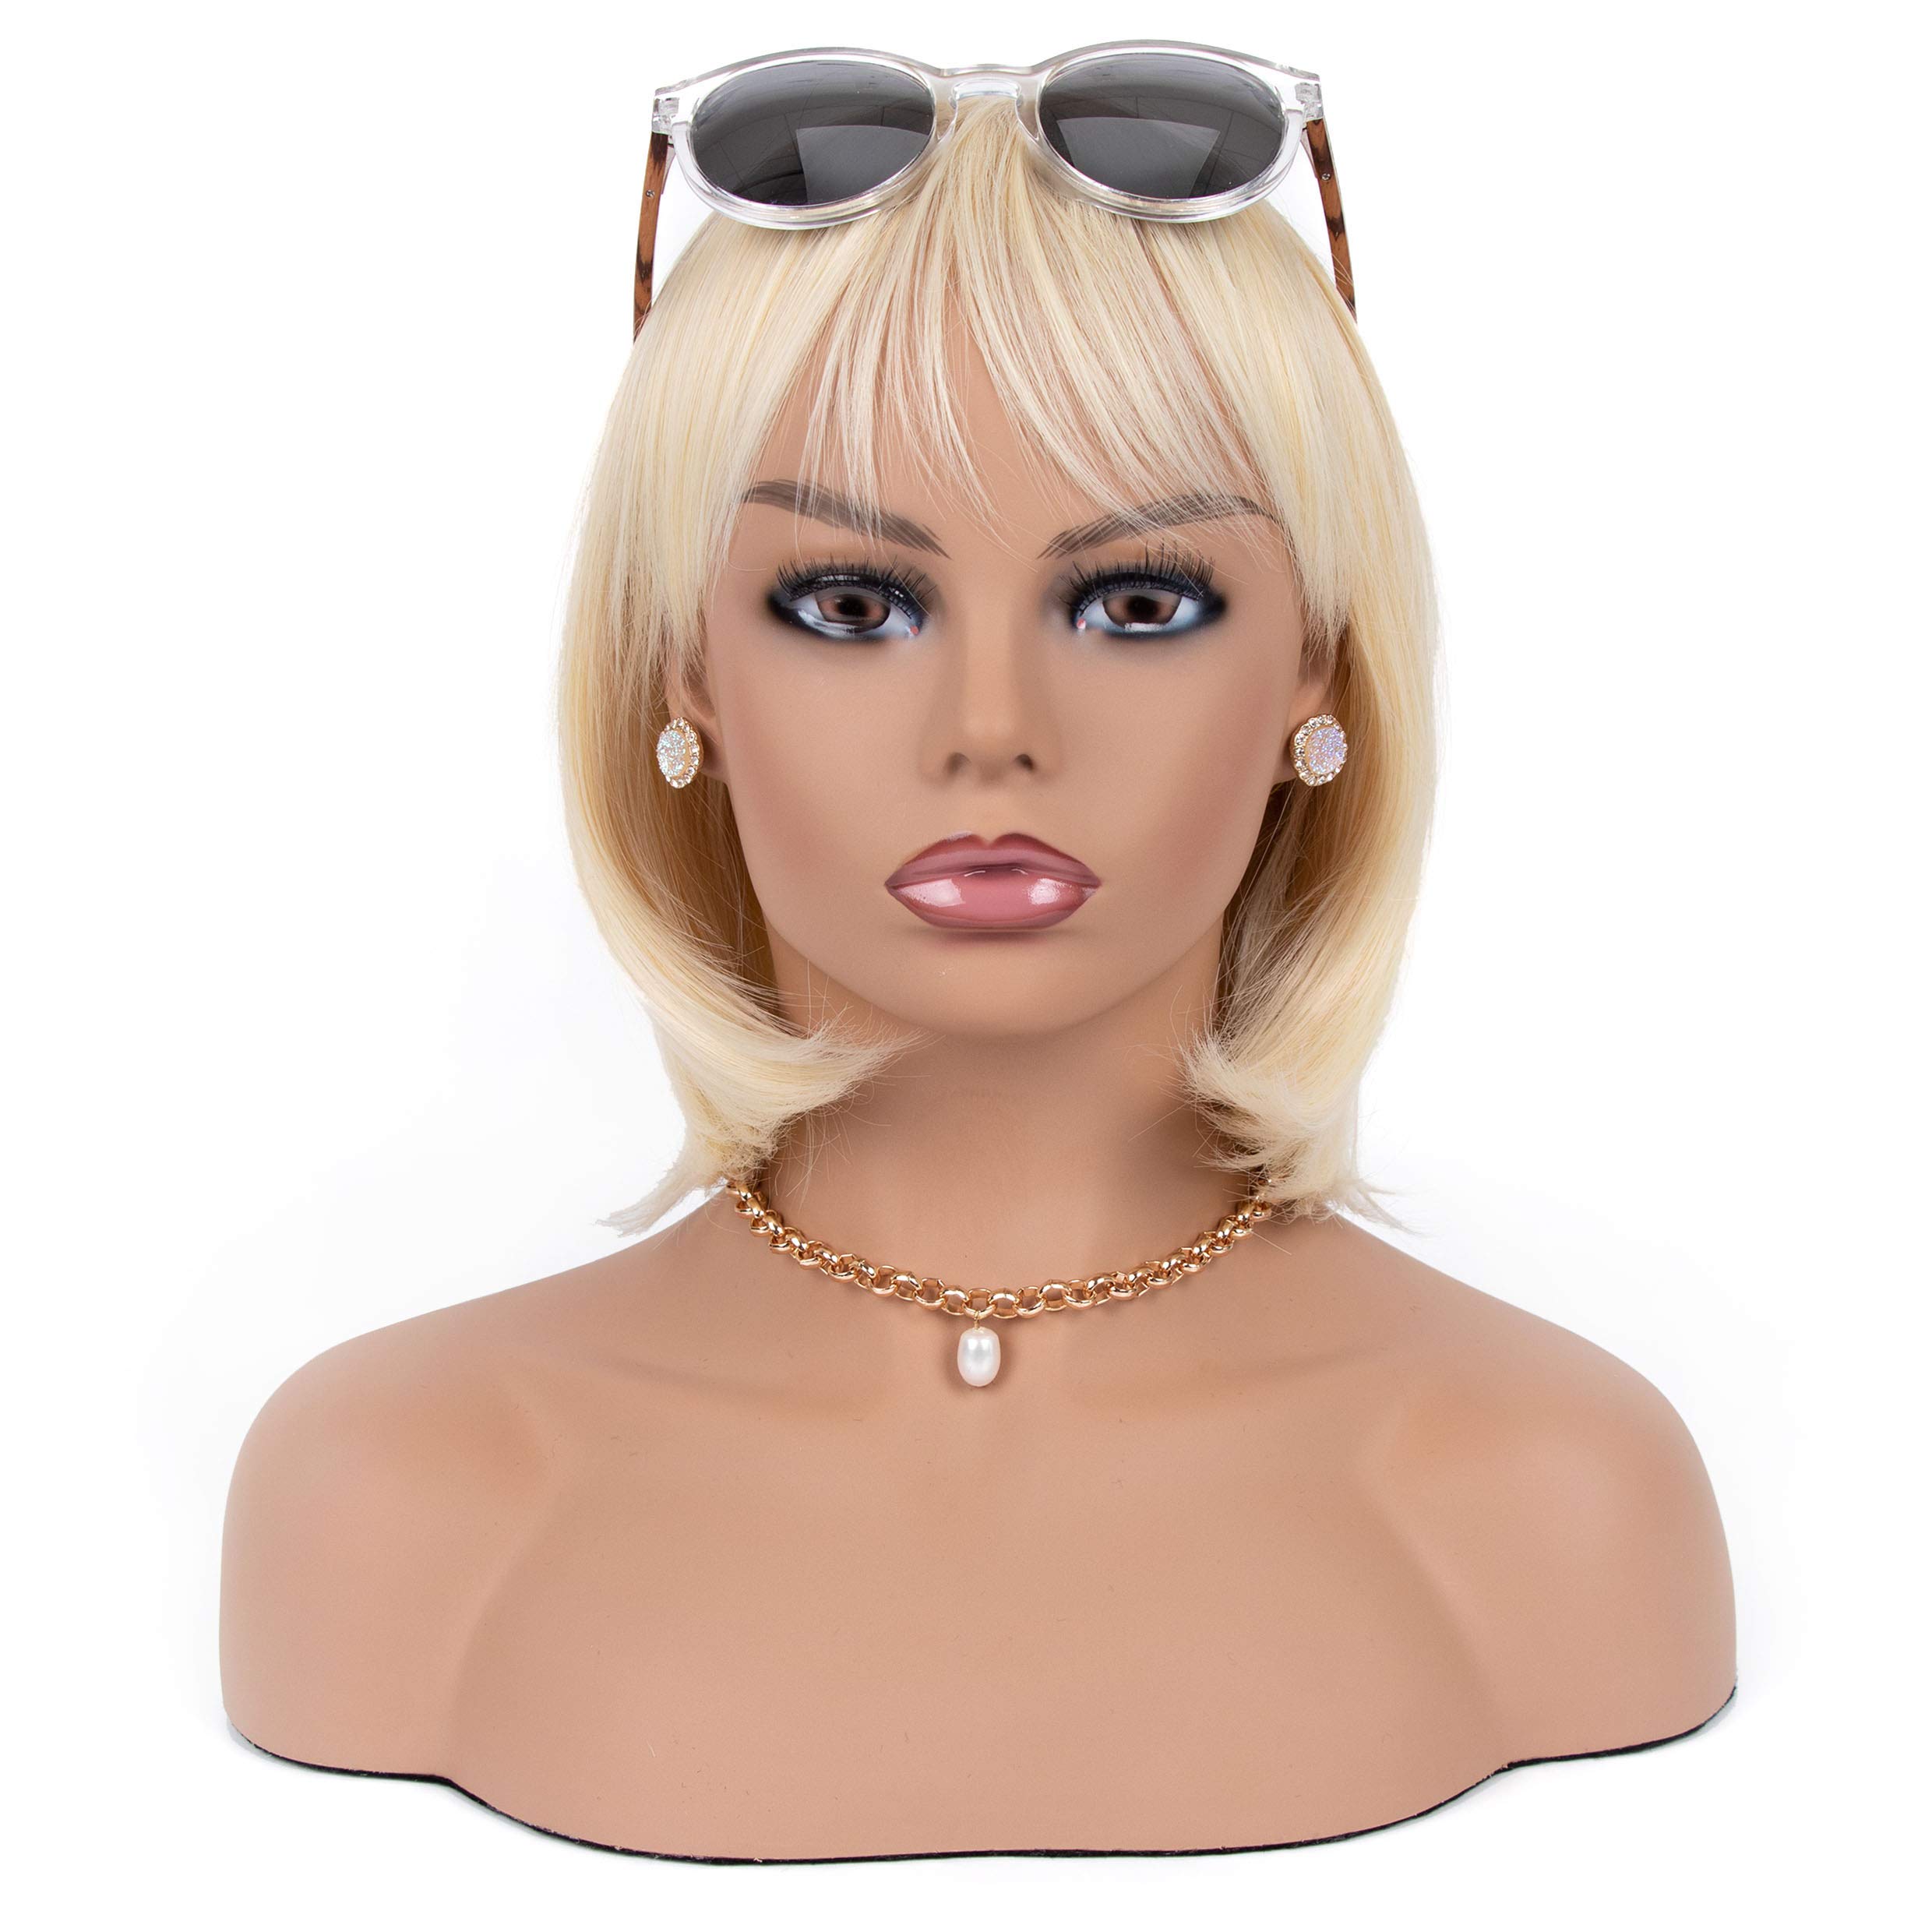  A1 Pacific Inc. 18 Female Life size Mannequin Head for Wigs,  Hats, Sunglasses Jewelry Display PD3R-24 : Industrial & Scientific